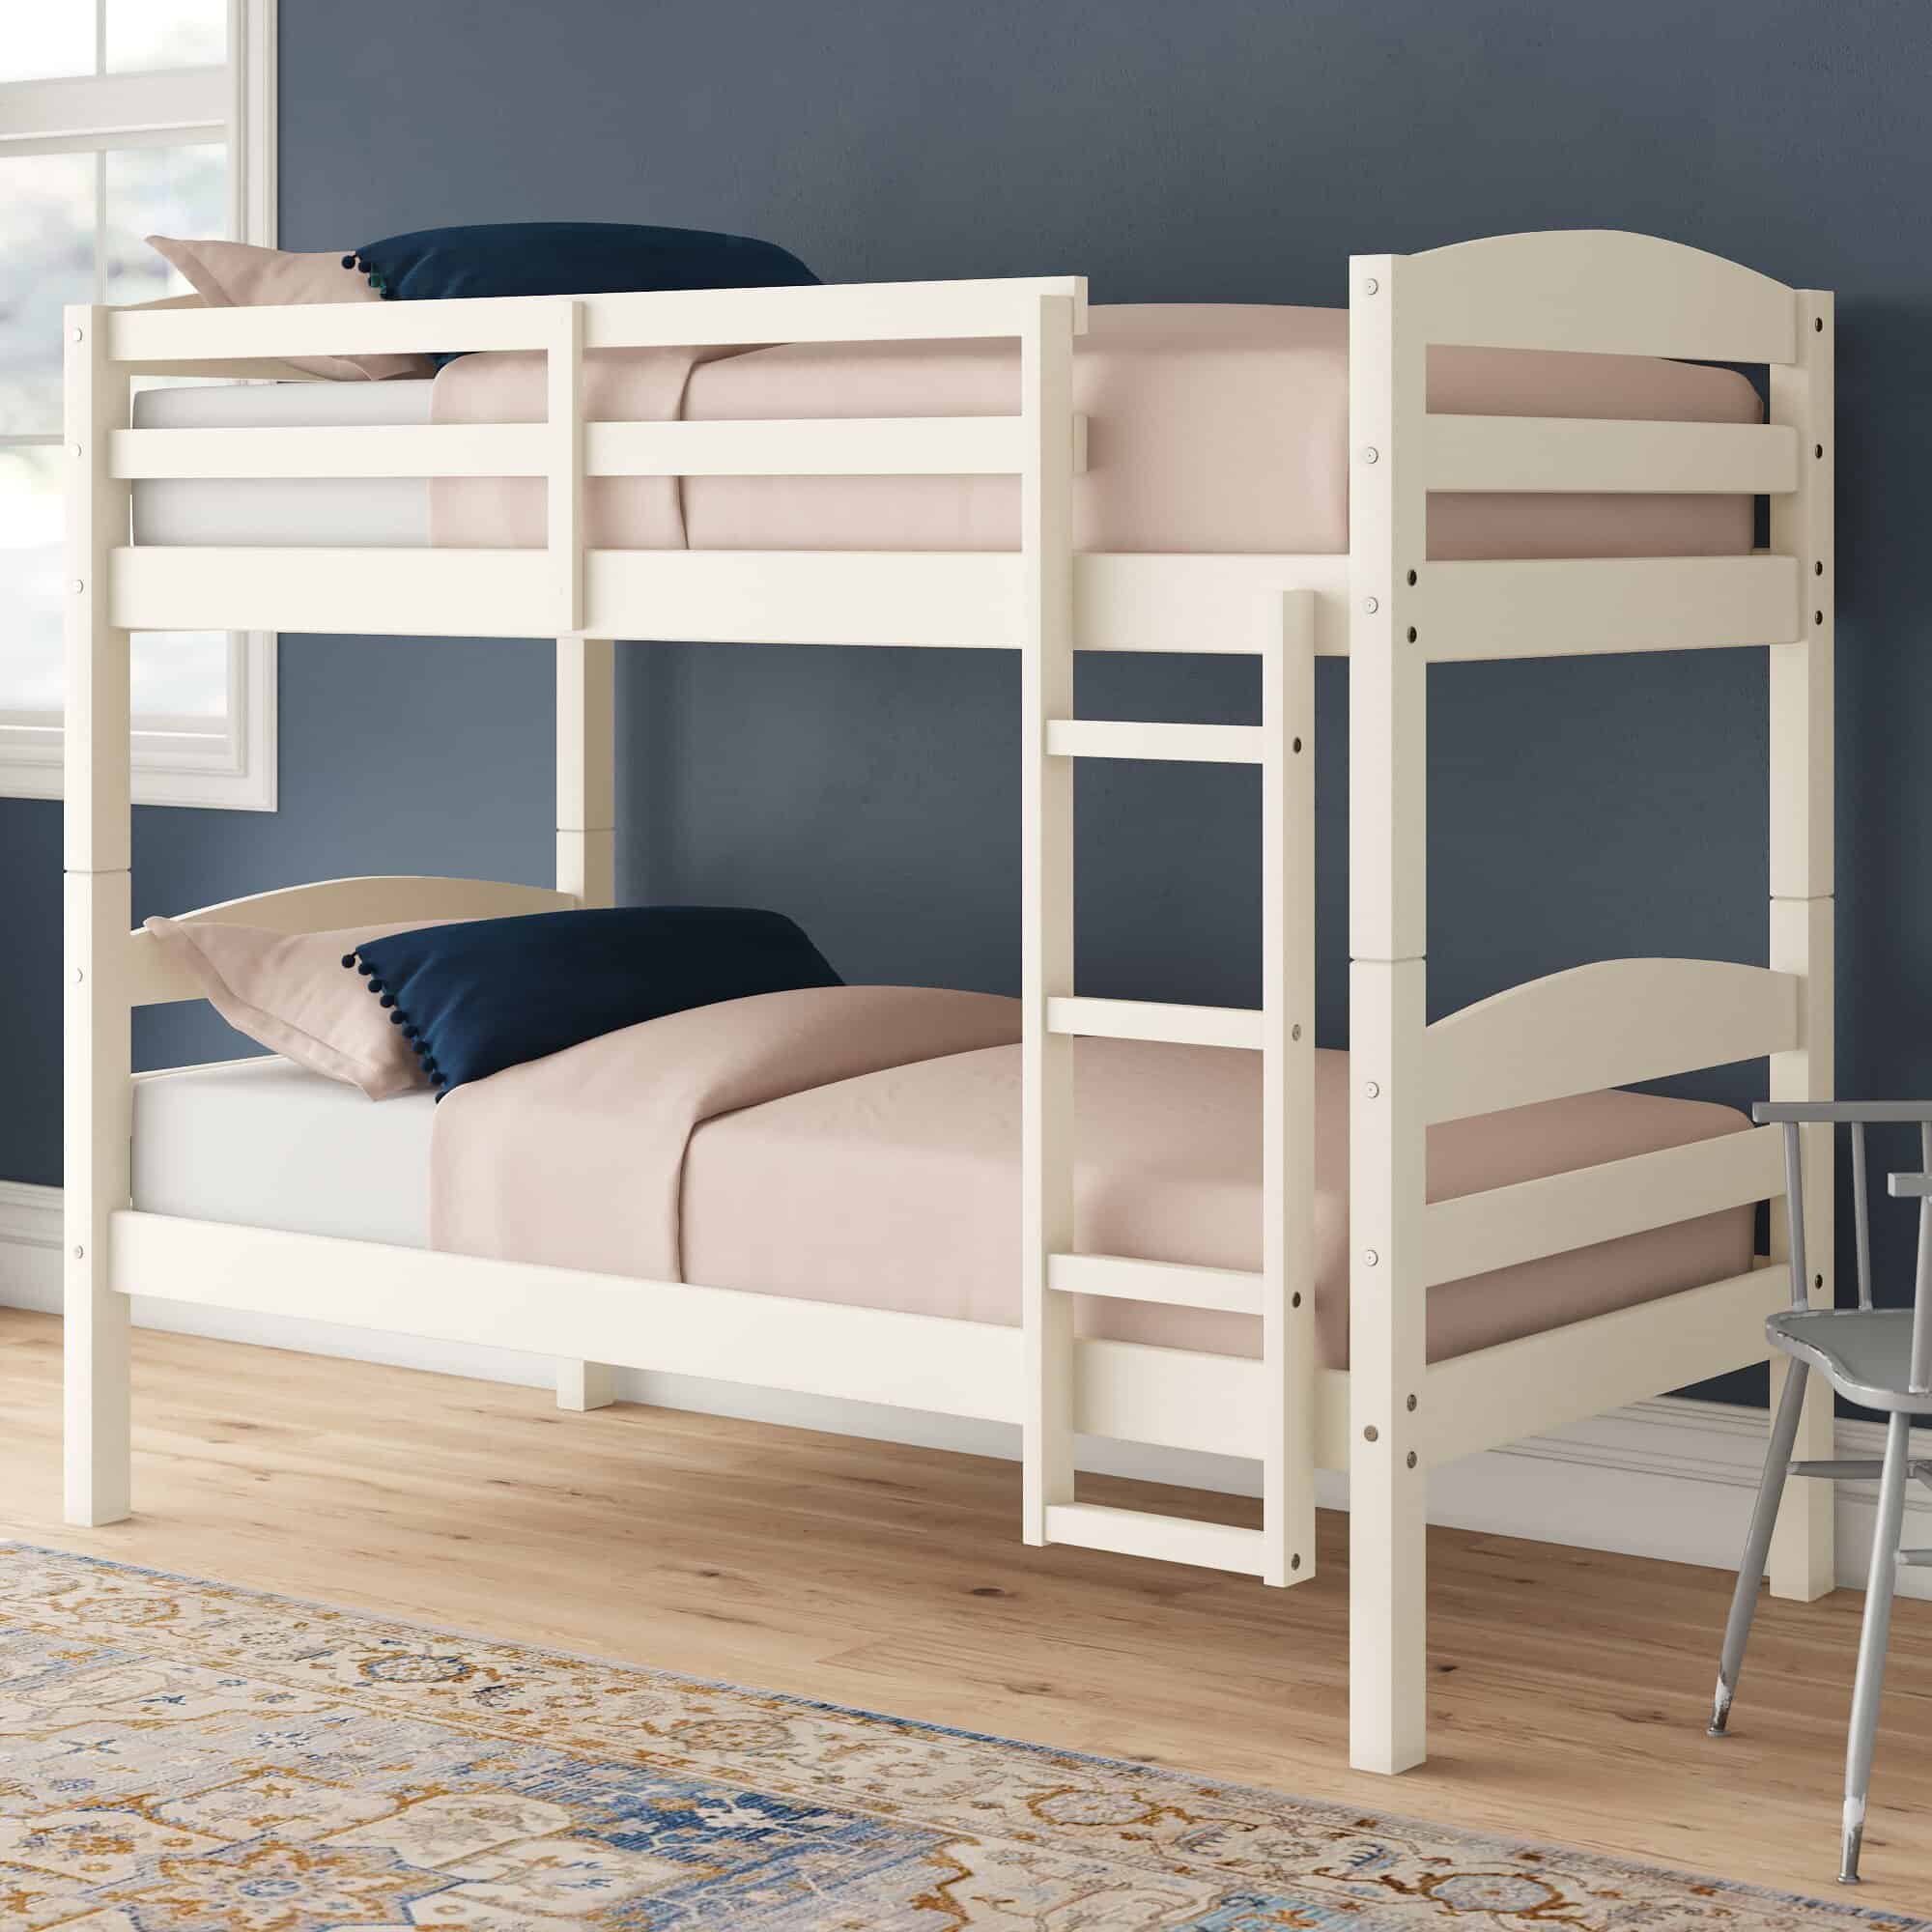 Bunk Beds Are A Fun Way To Save Space